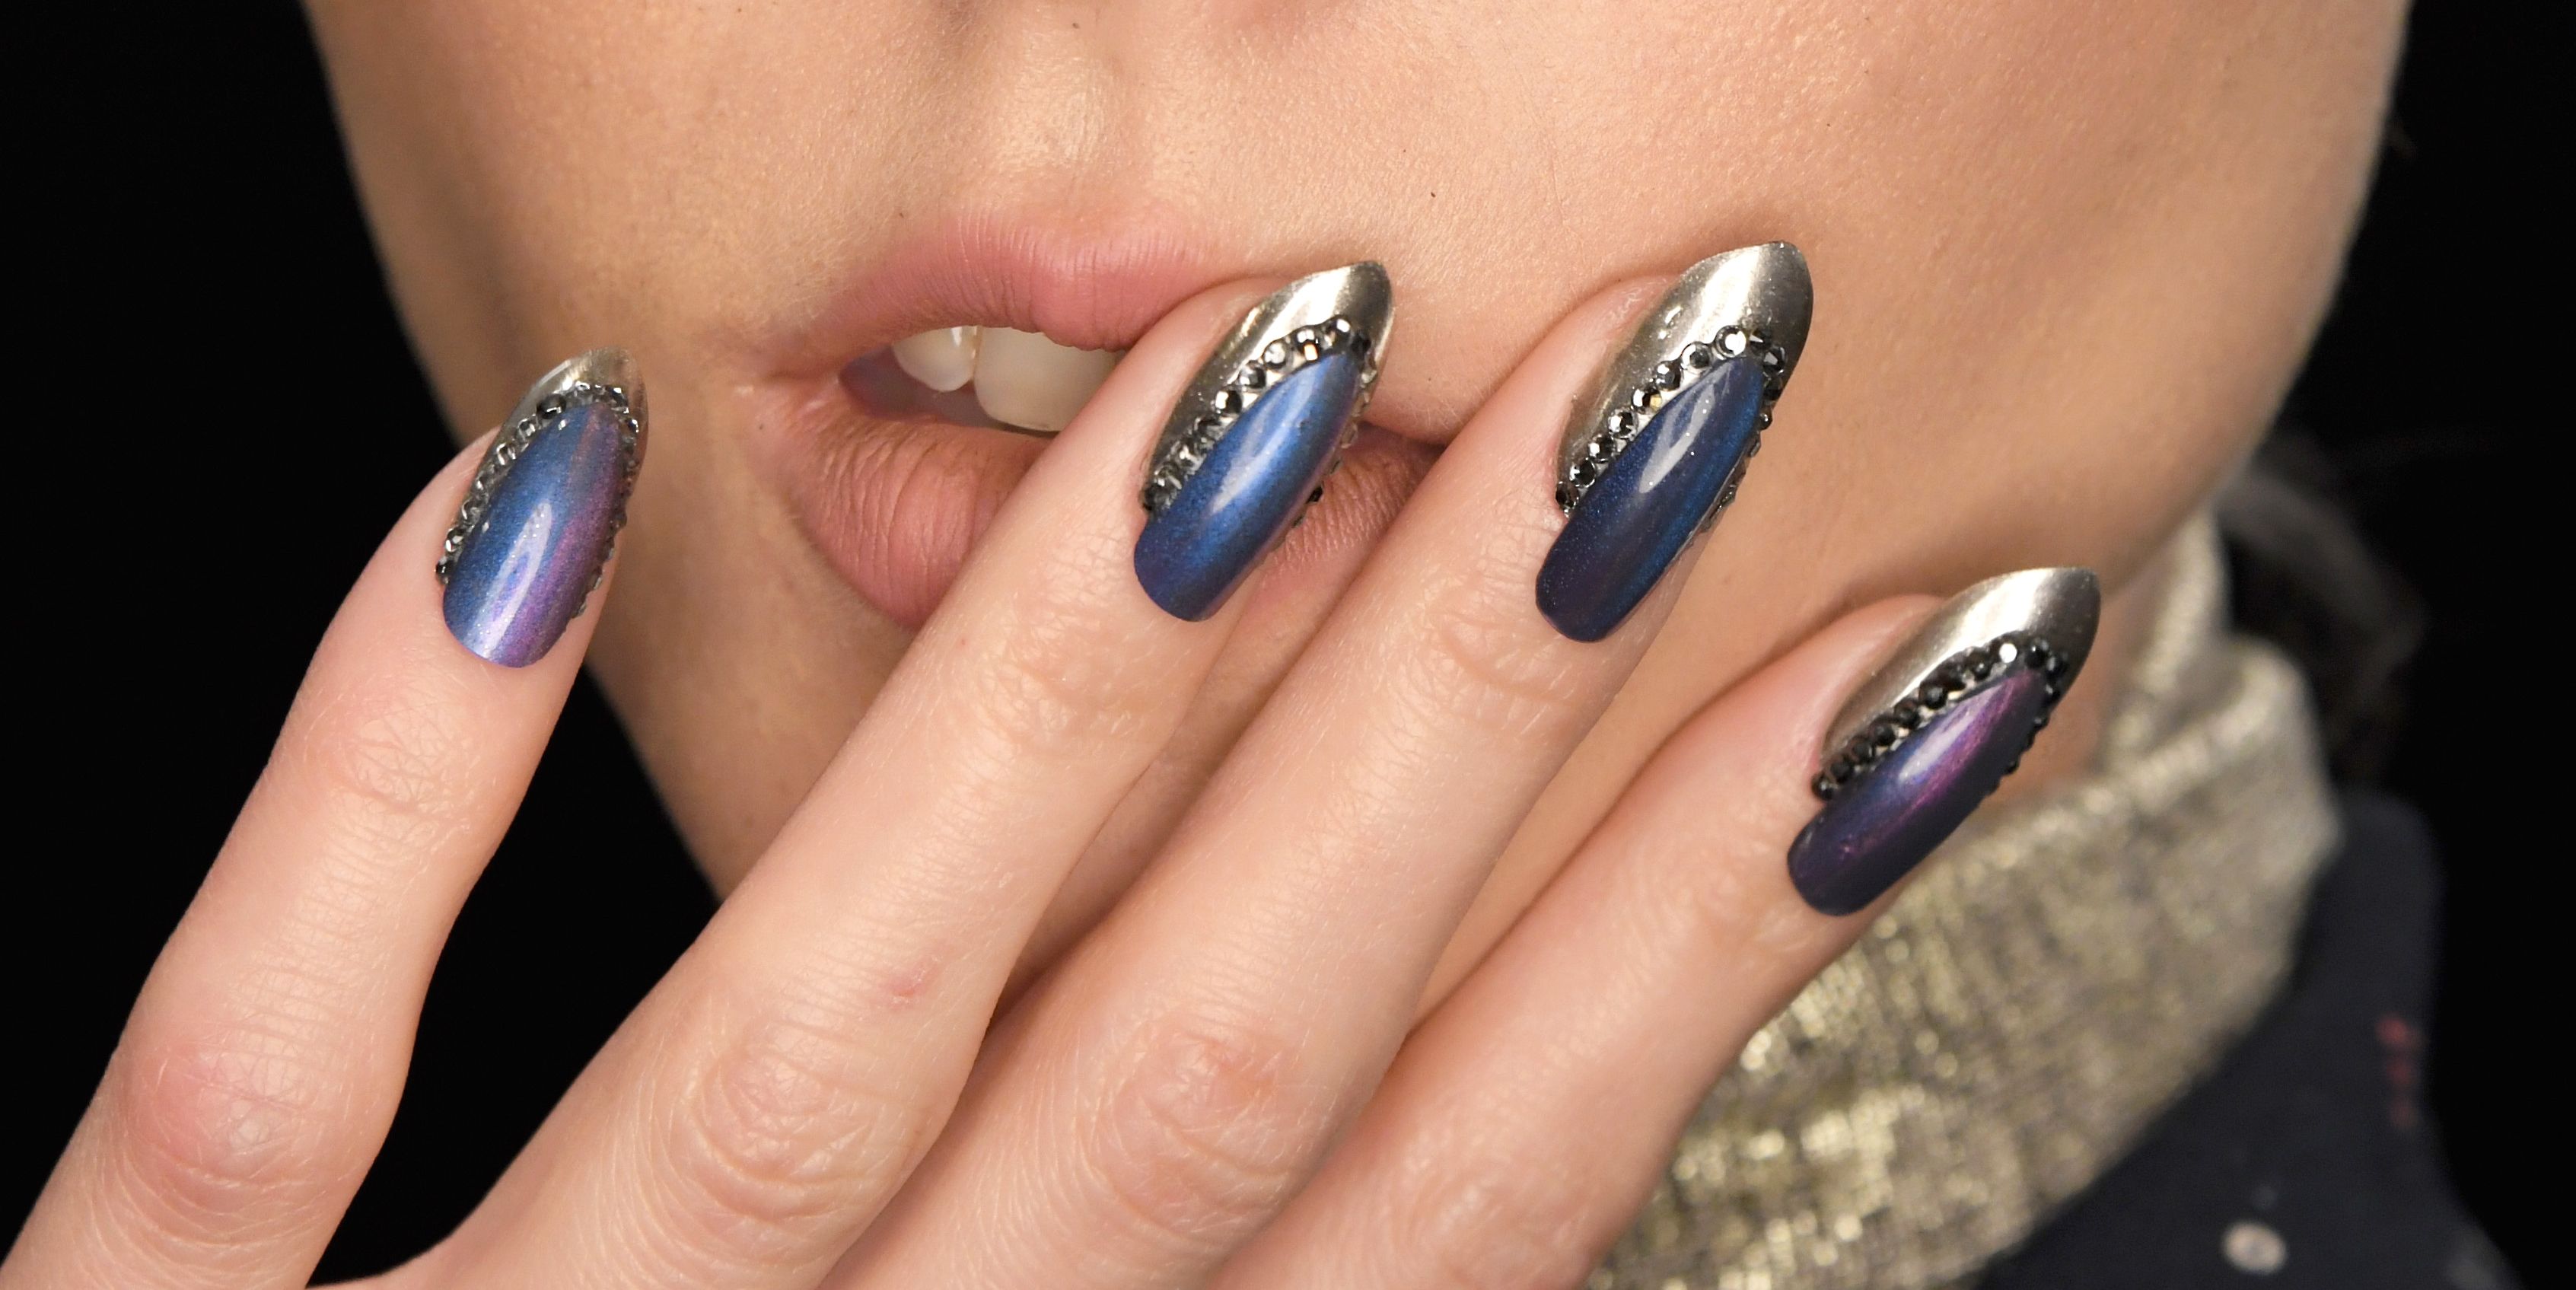 12 Best Nail Drills for At-Home Salon Results